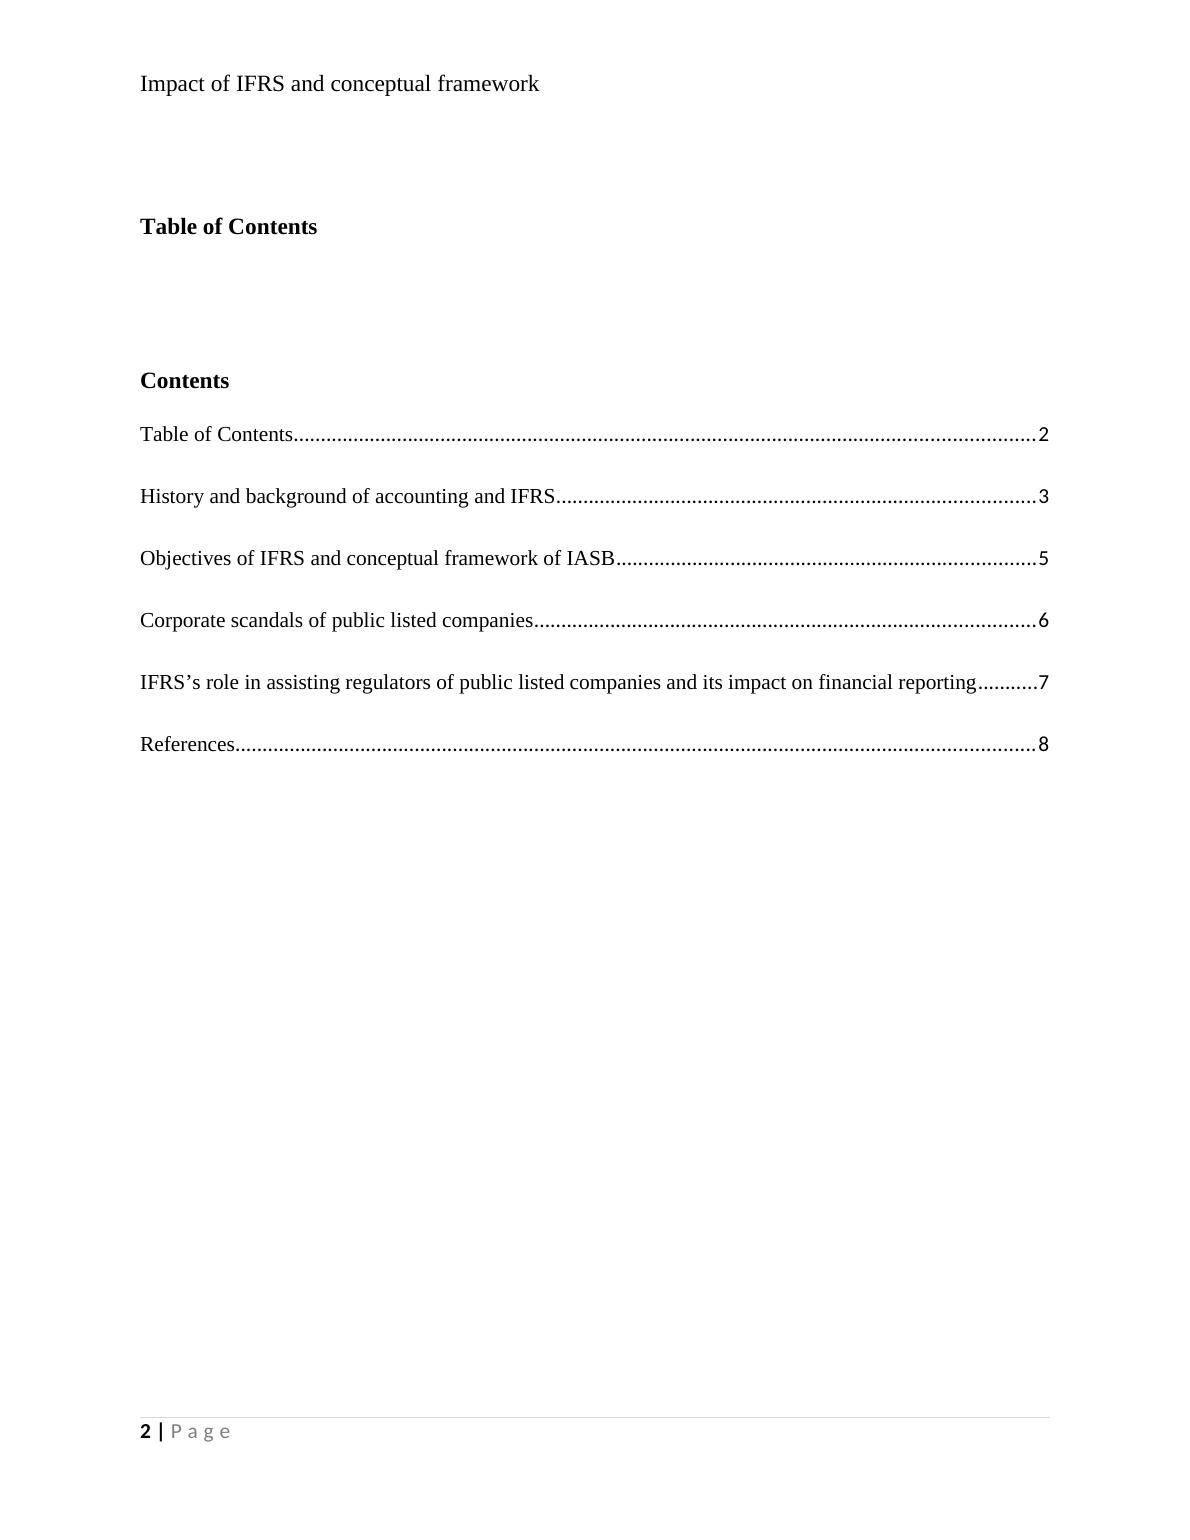 Impact of IFRS and Conceptual Framework Assignment_2